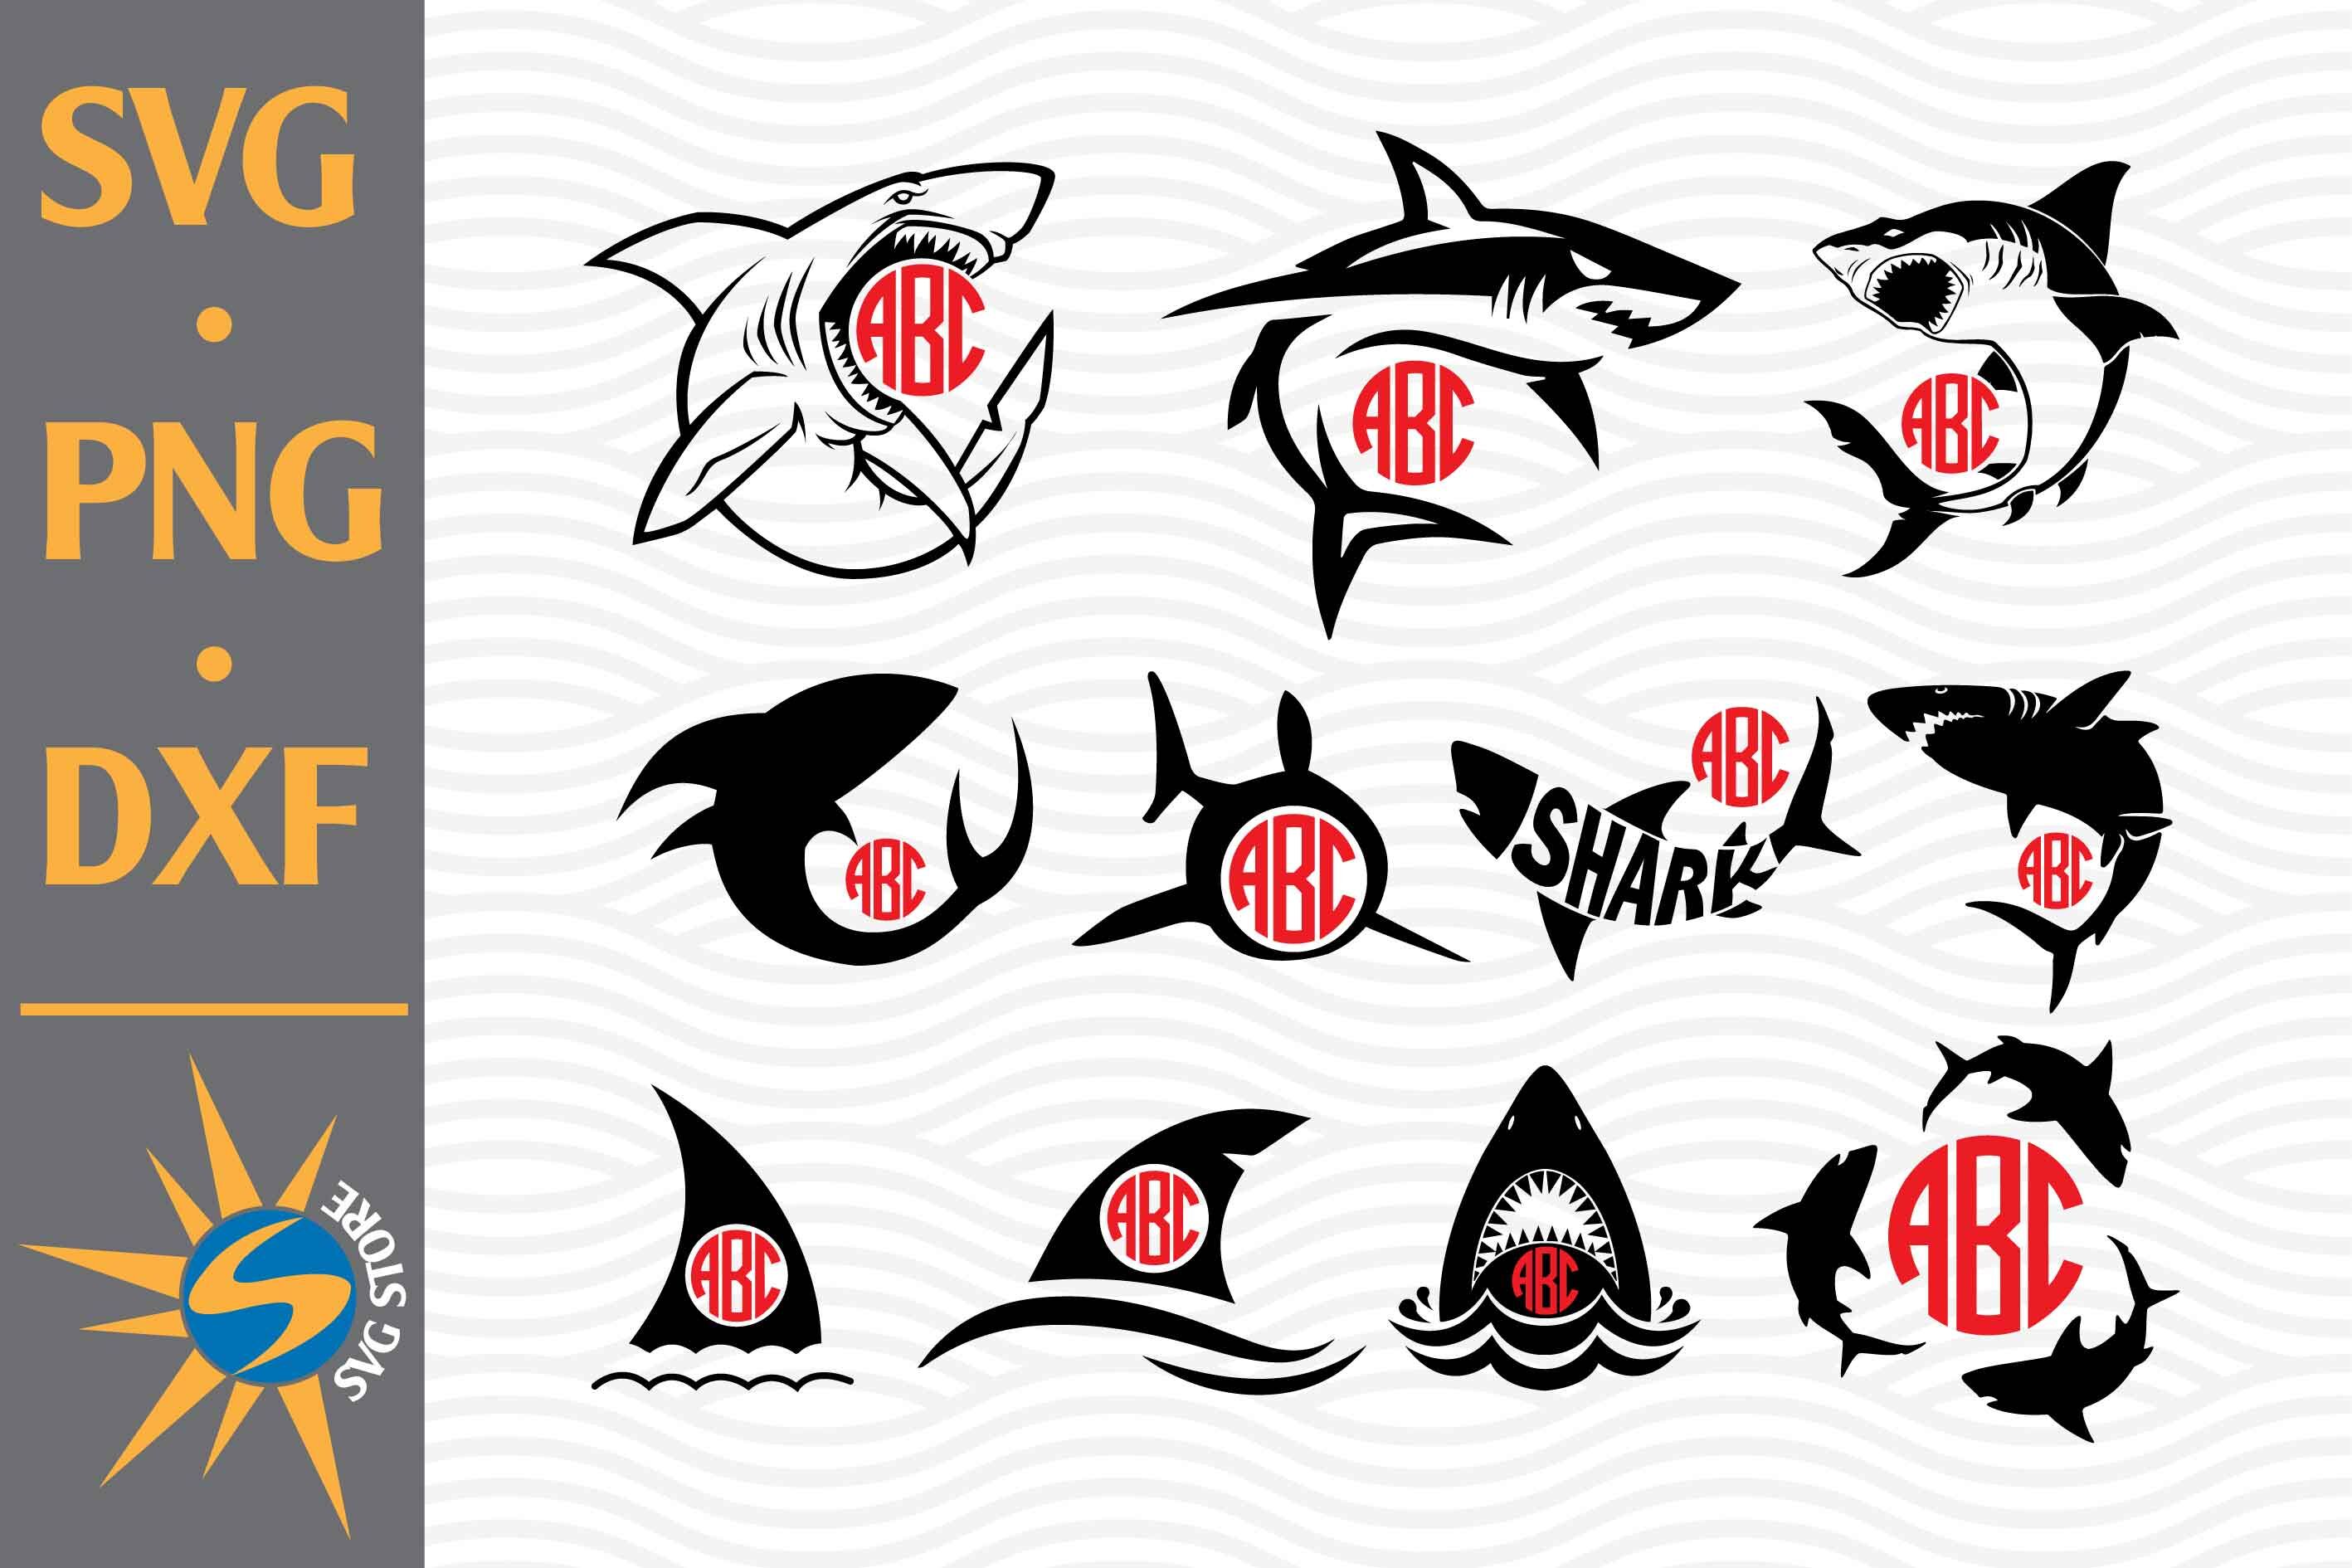 Download Shark Monogram SVG, PNG, DXF Digital Files Include By SVGStoreShop | TheHungryJPEG.com